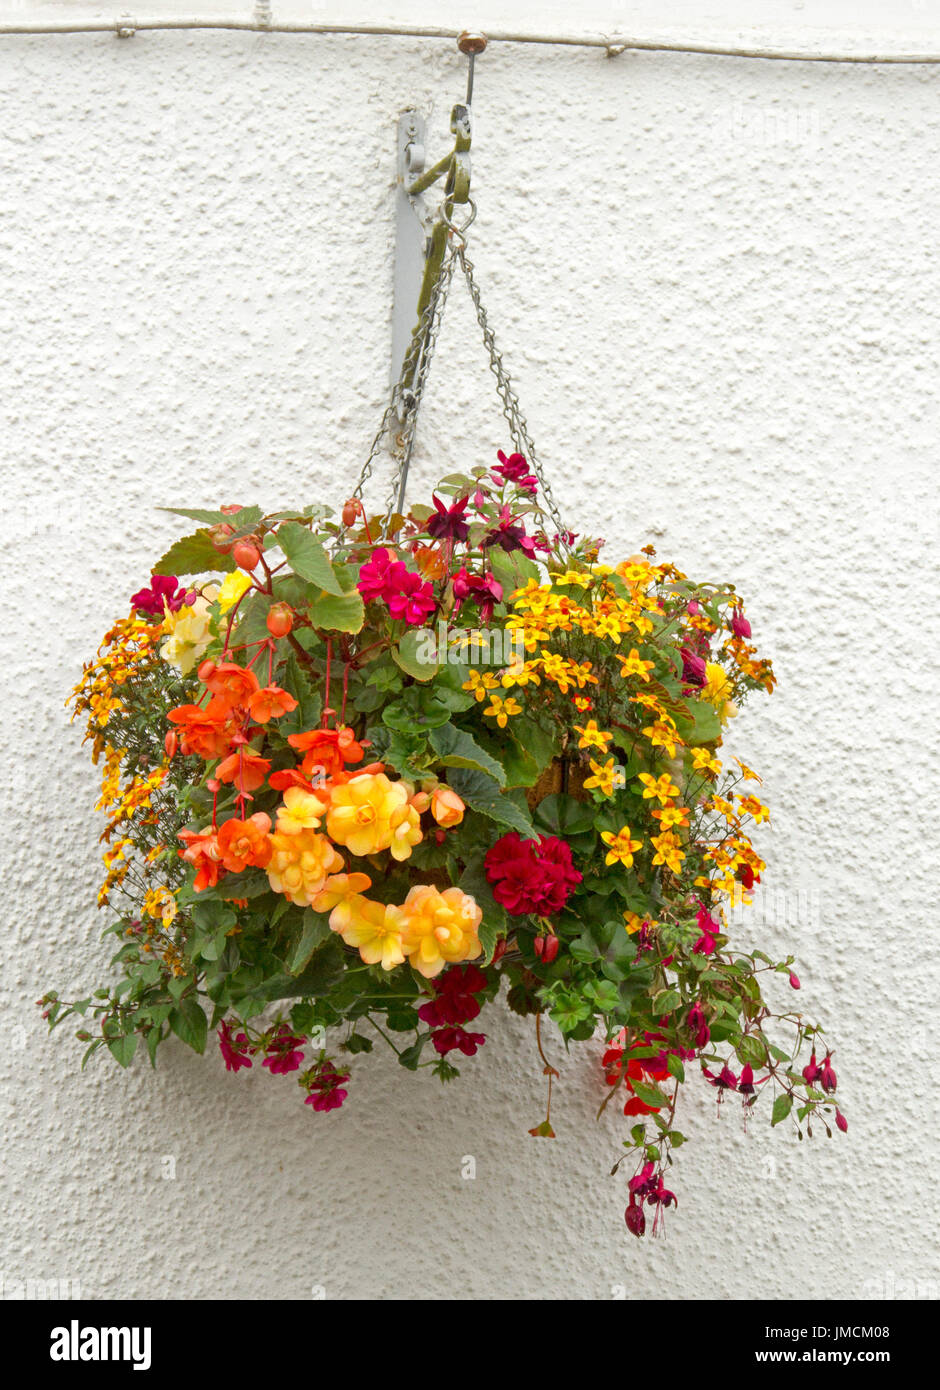 Mass of colourful flowering plants inc. red and purple fuchsias, orange and yellow begonias, and yellow daisies in hanging basket against white wall Stock Photo